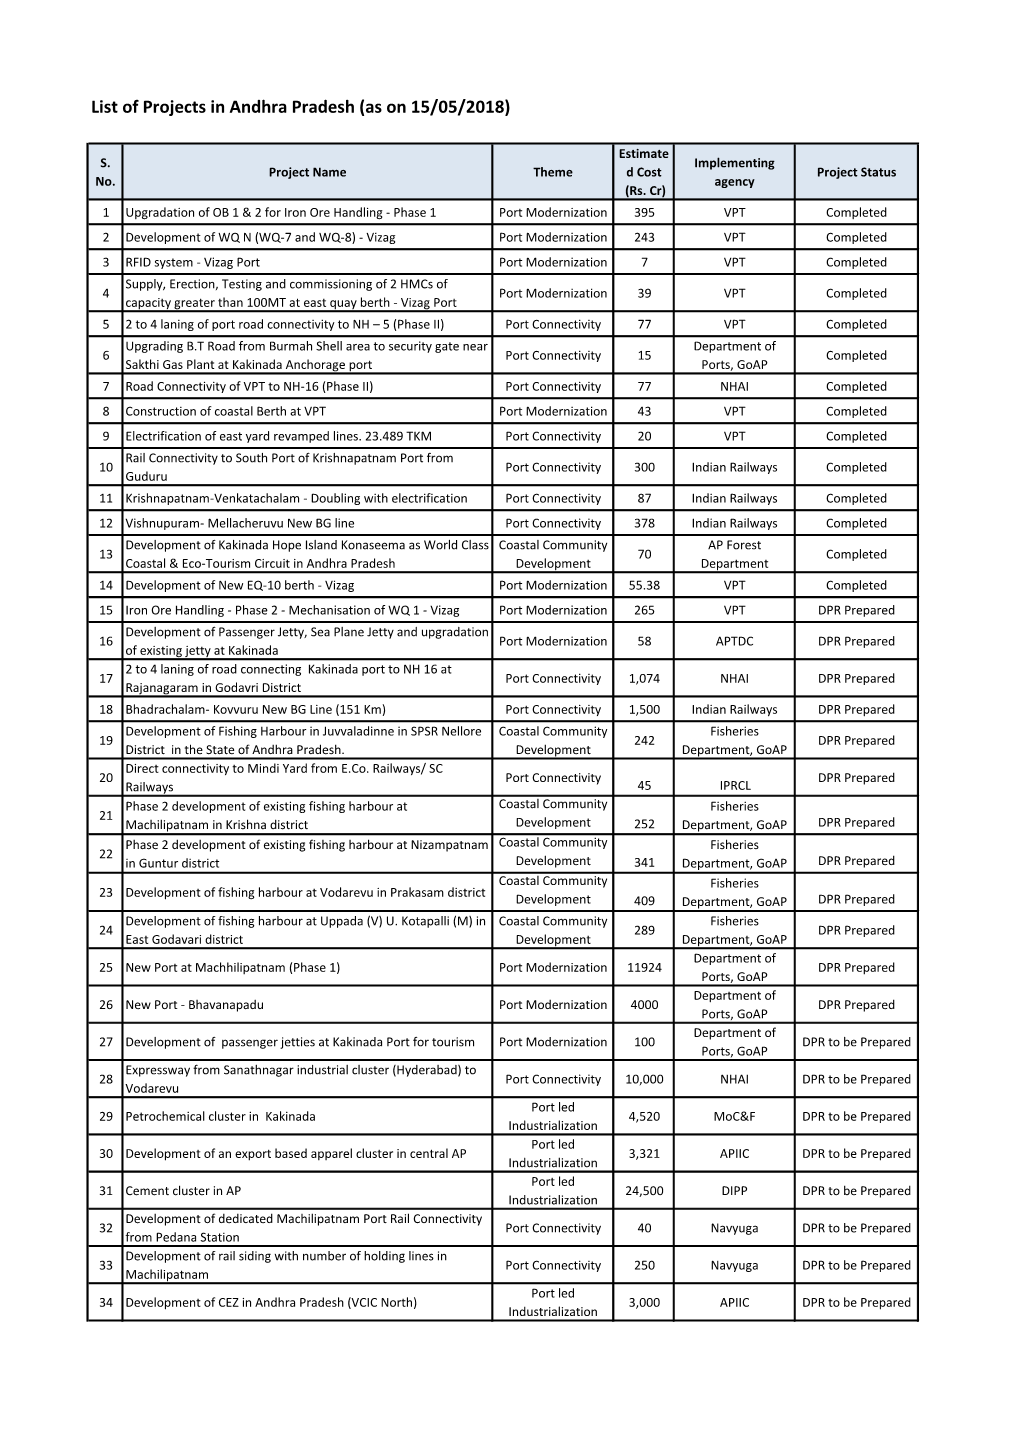 List of Projects in Andhra Pradesh (As on 15/05/2018)